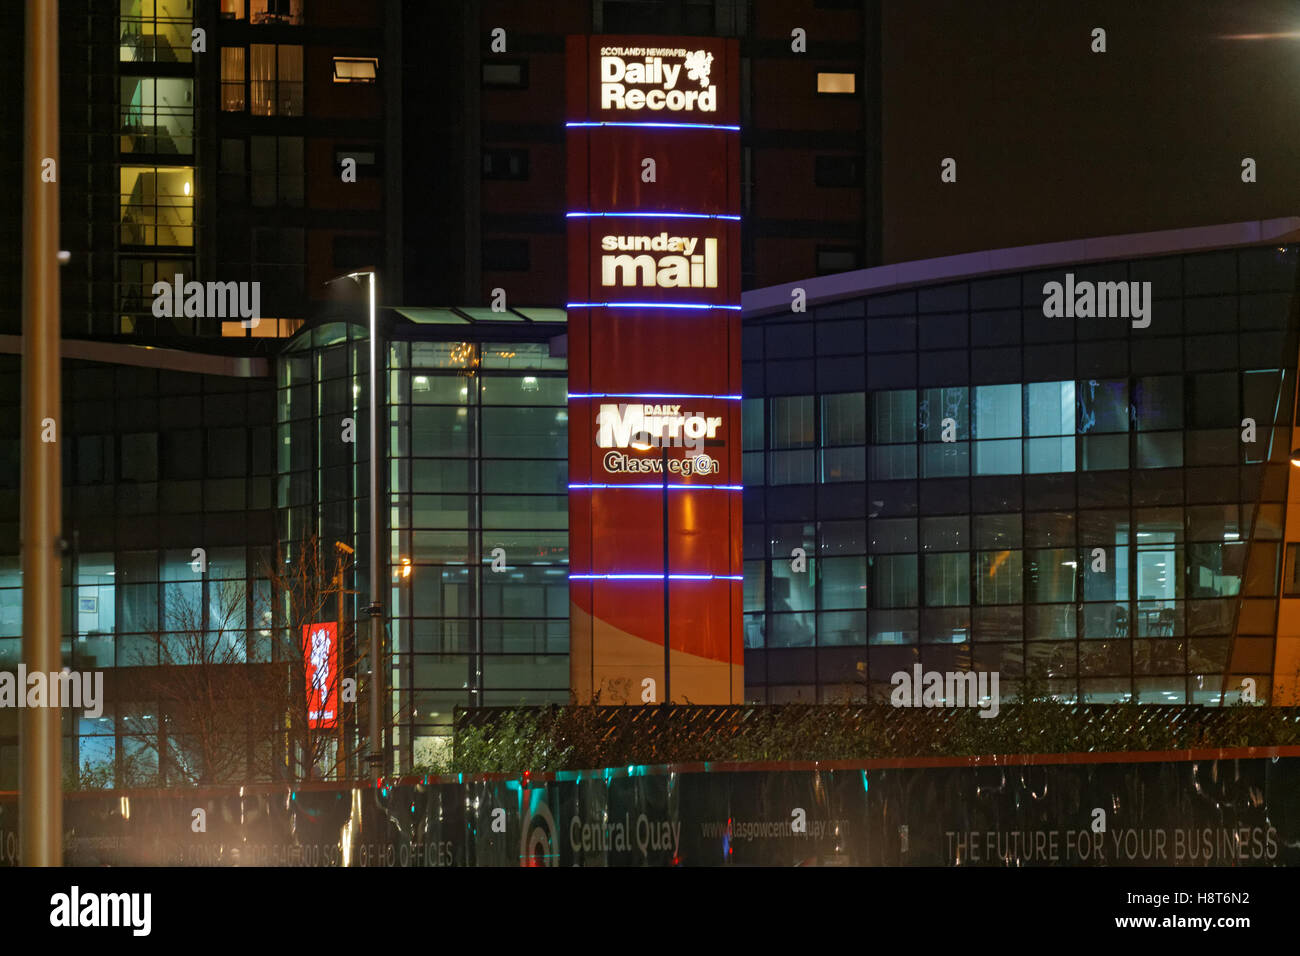 daily record mirror sunday mail building at night Stock Photo